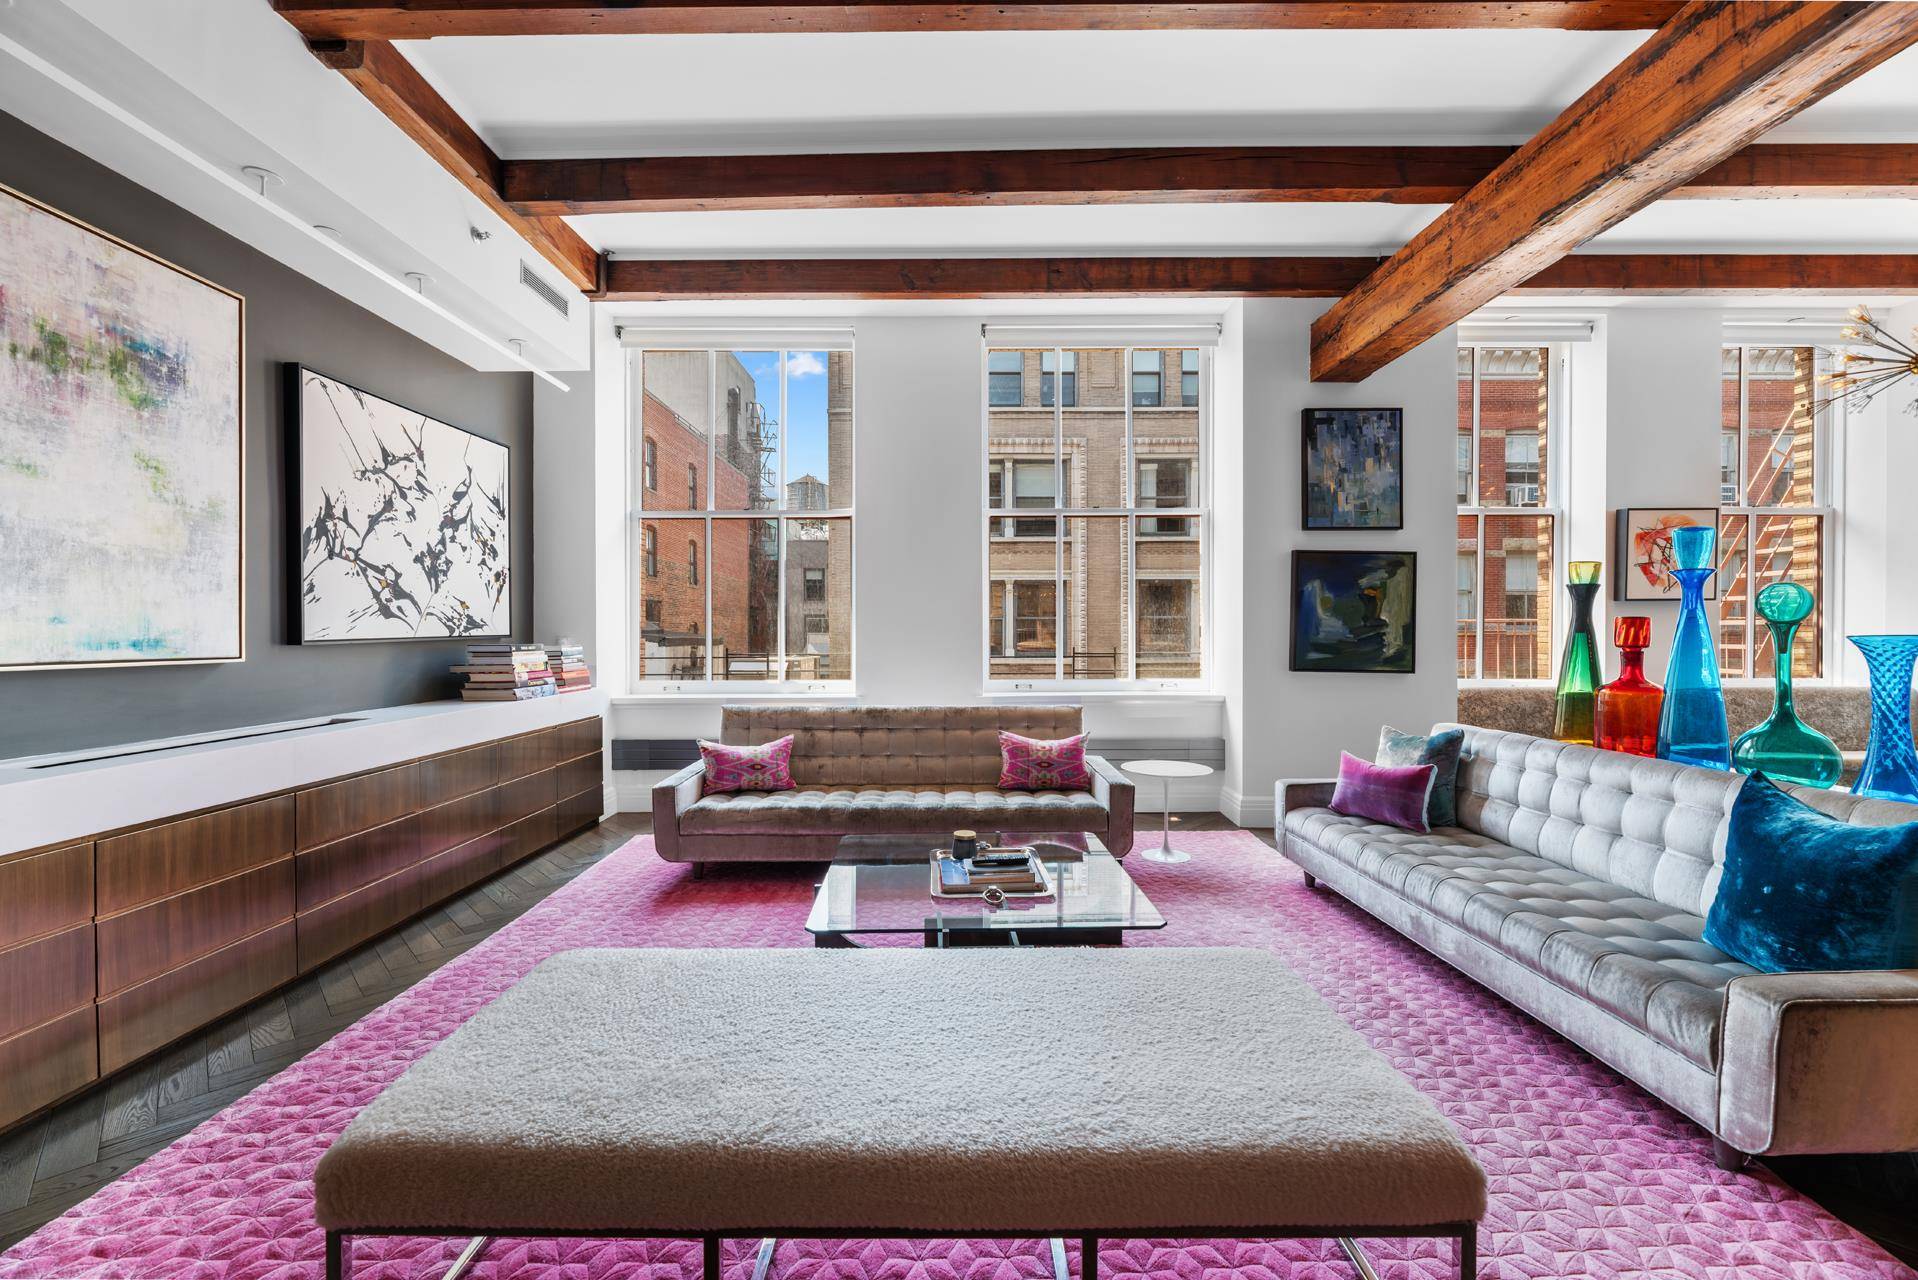 Experience the allure of an authentic pre war SoHo loft with intricate detailing and modern charm in Unit 4S at 104 Wooster Street.